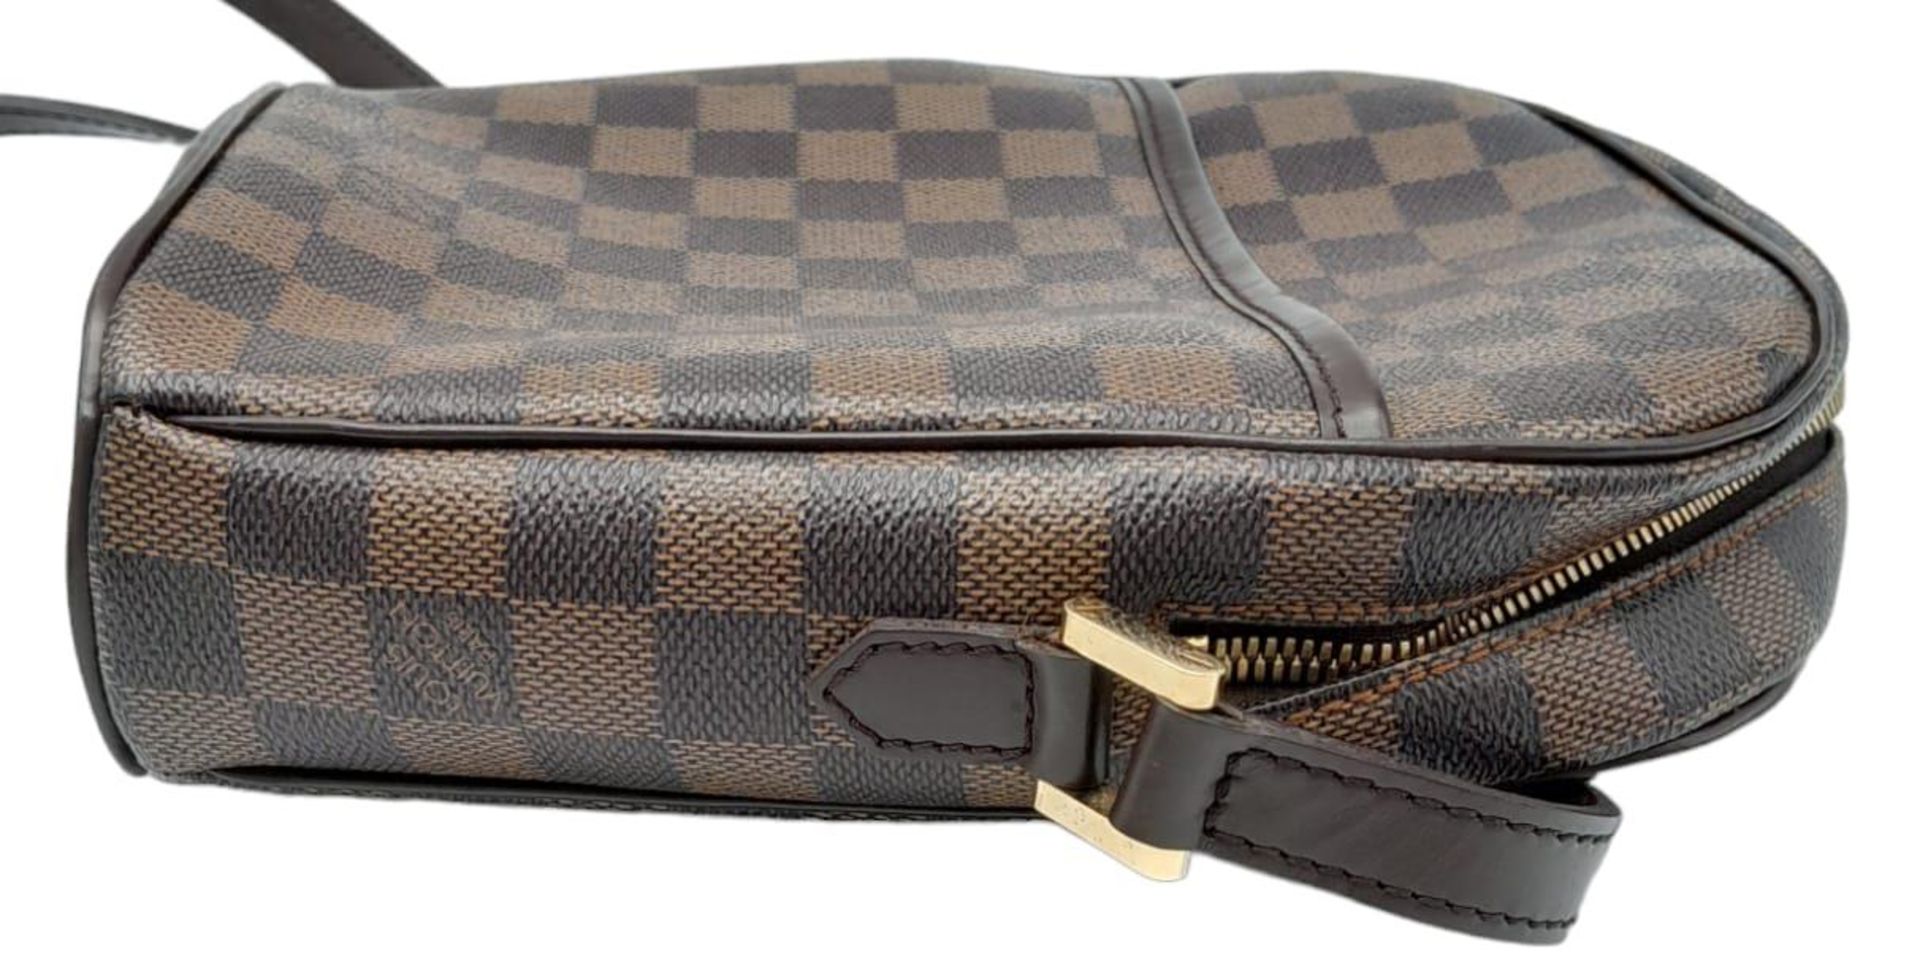 A Louis Vuitton Damier Ebene 'Ipanema' Crossbody Bag. Leather exterior with gold-toned hardware, - Image 3 of 8